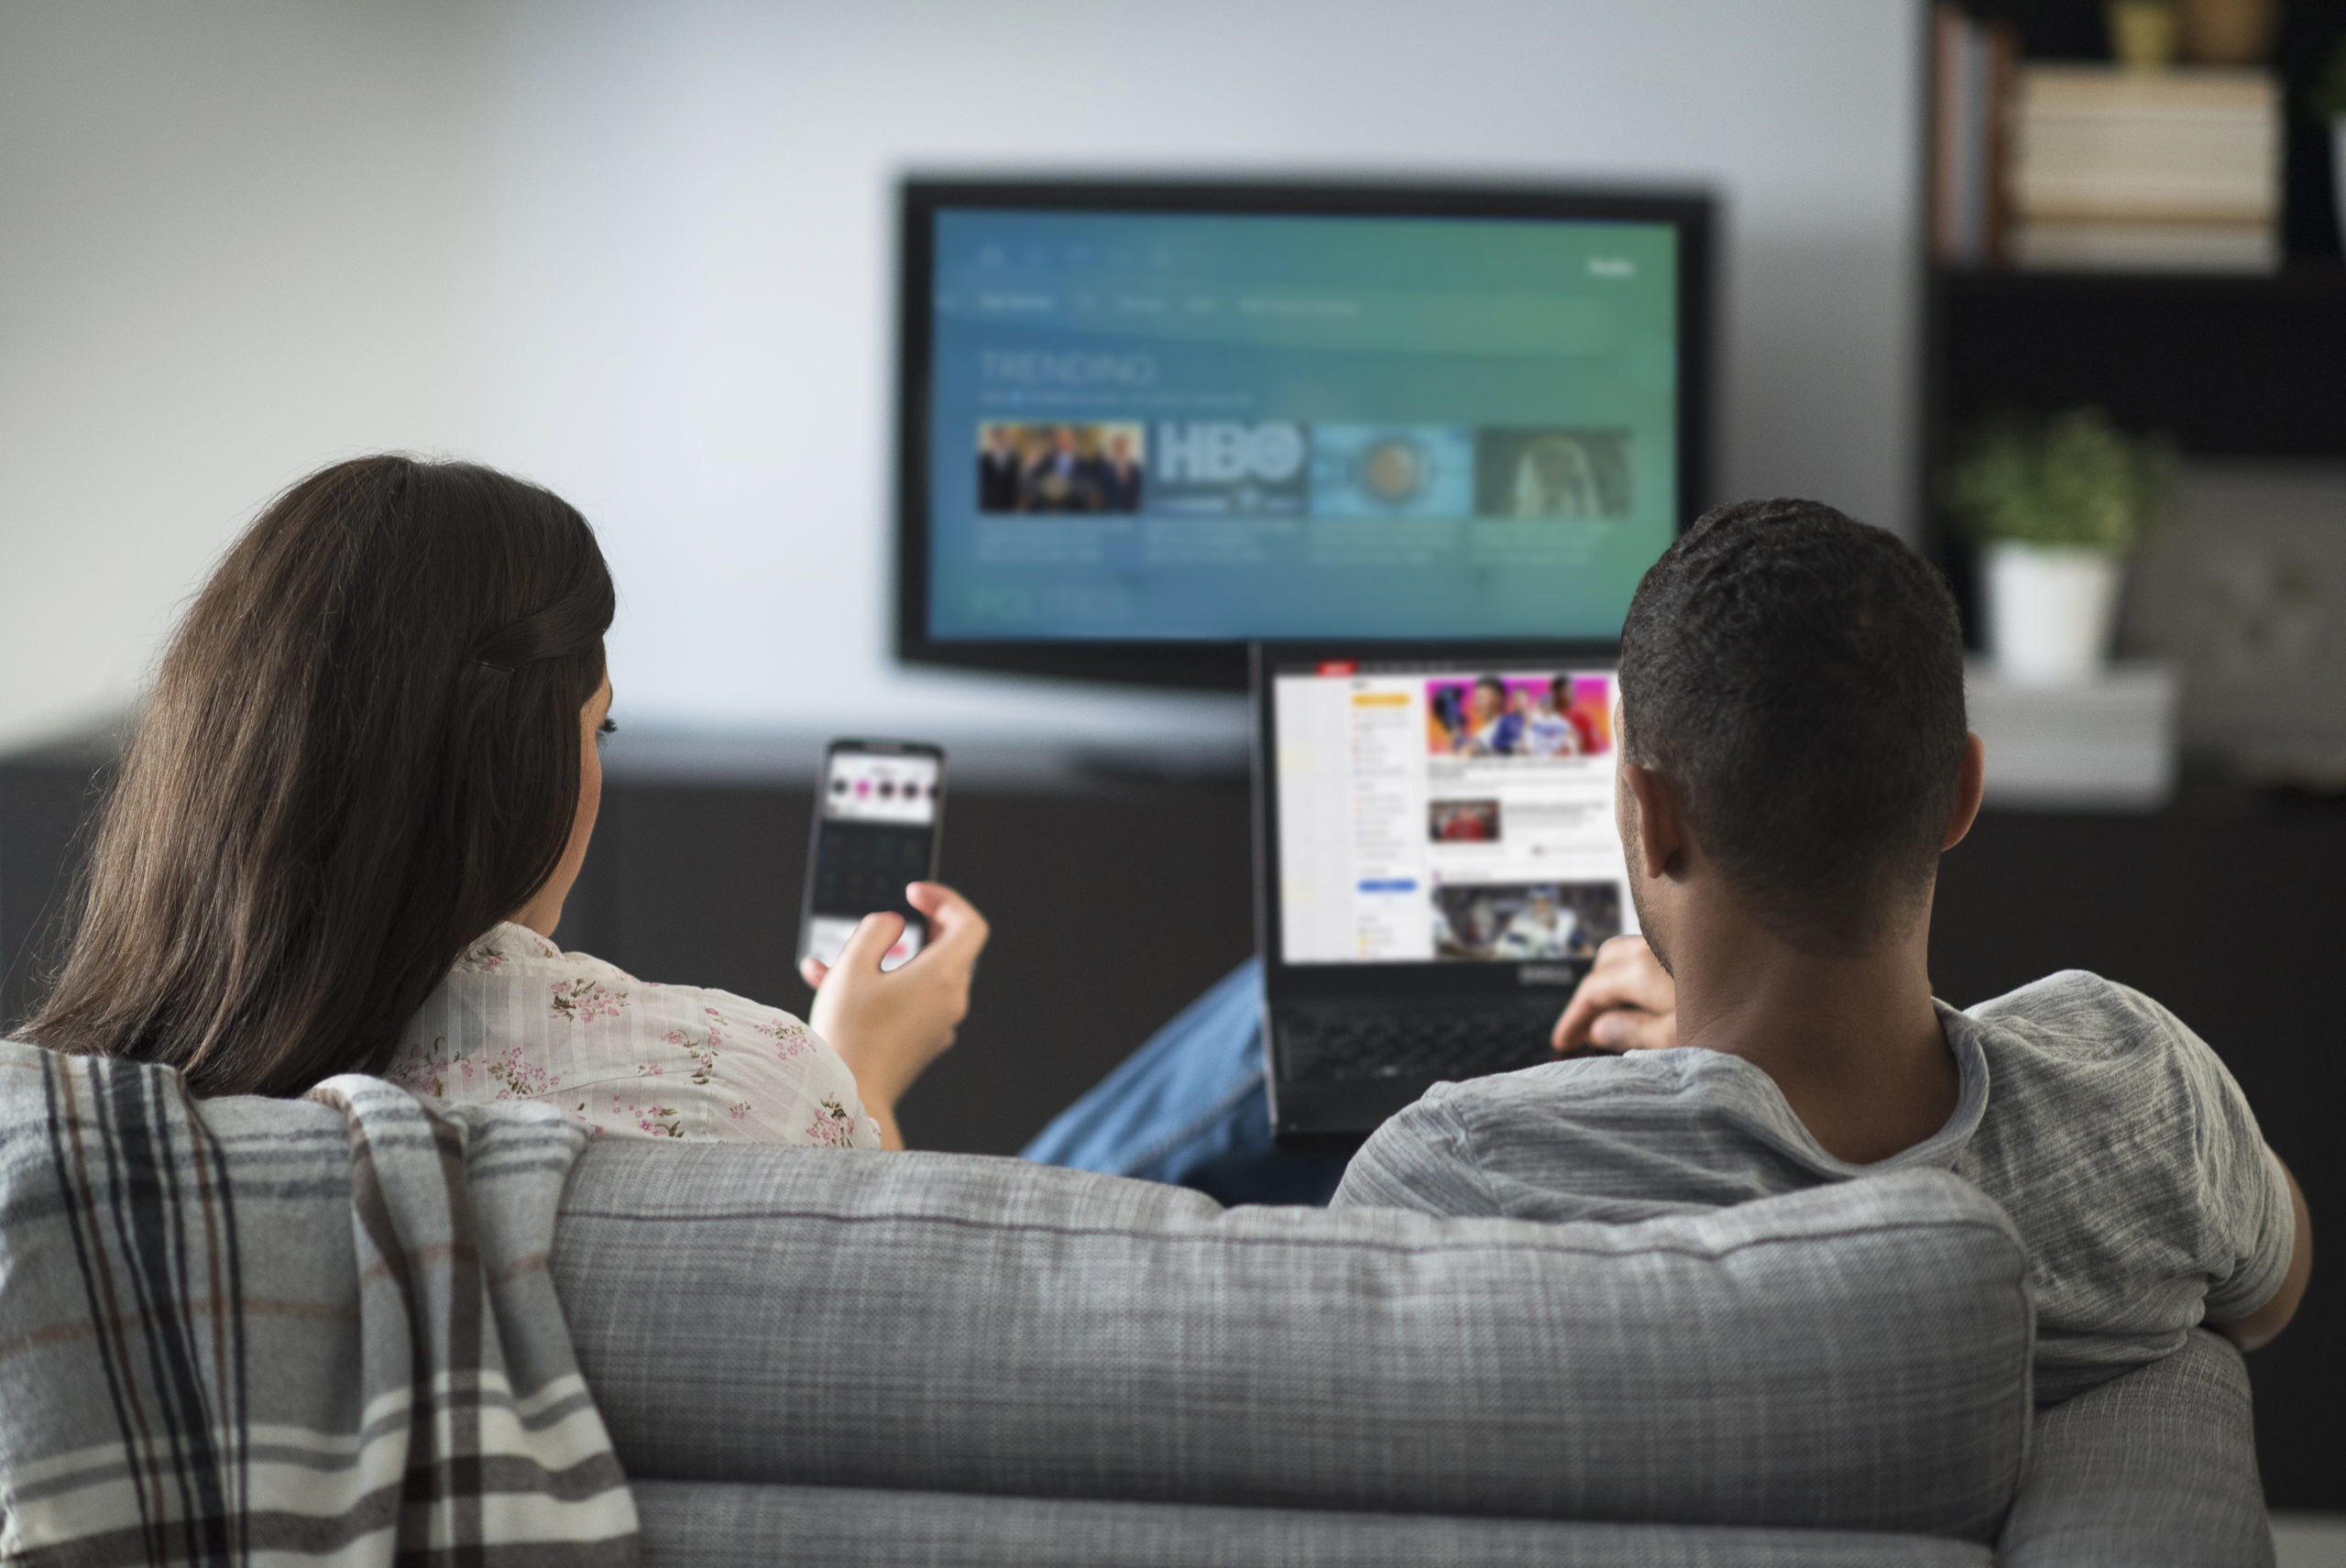 Key questions to ask your TV-digital measurement partner during the process